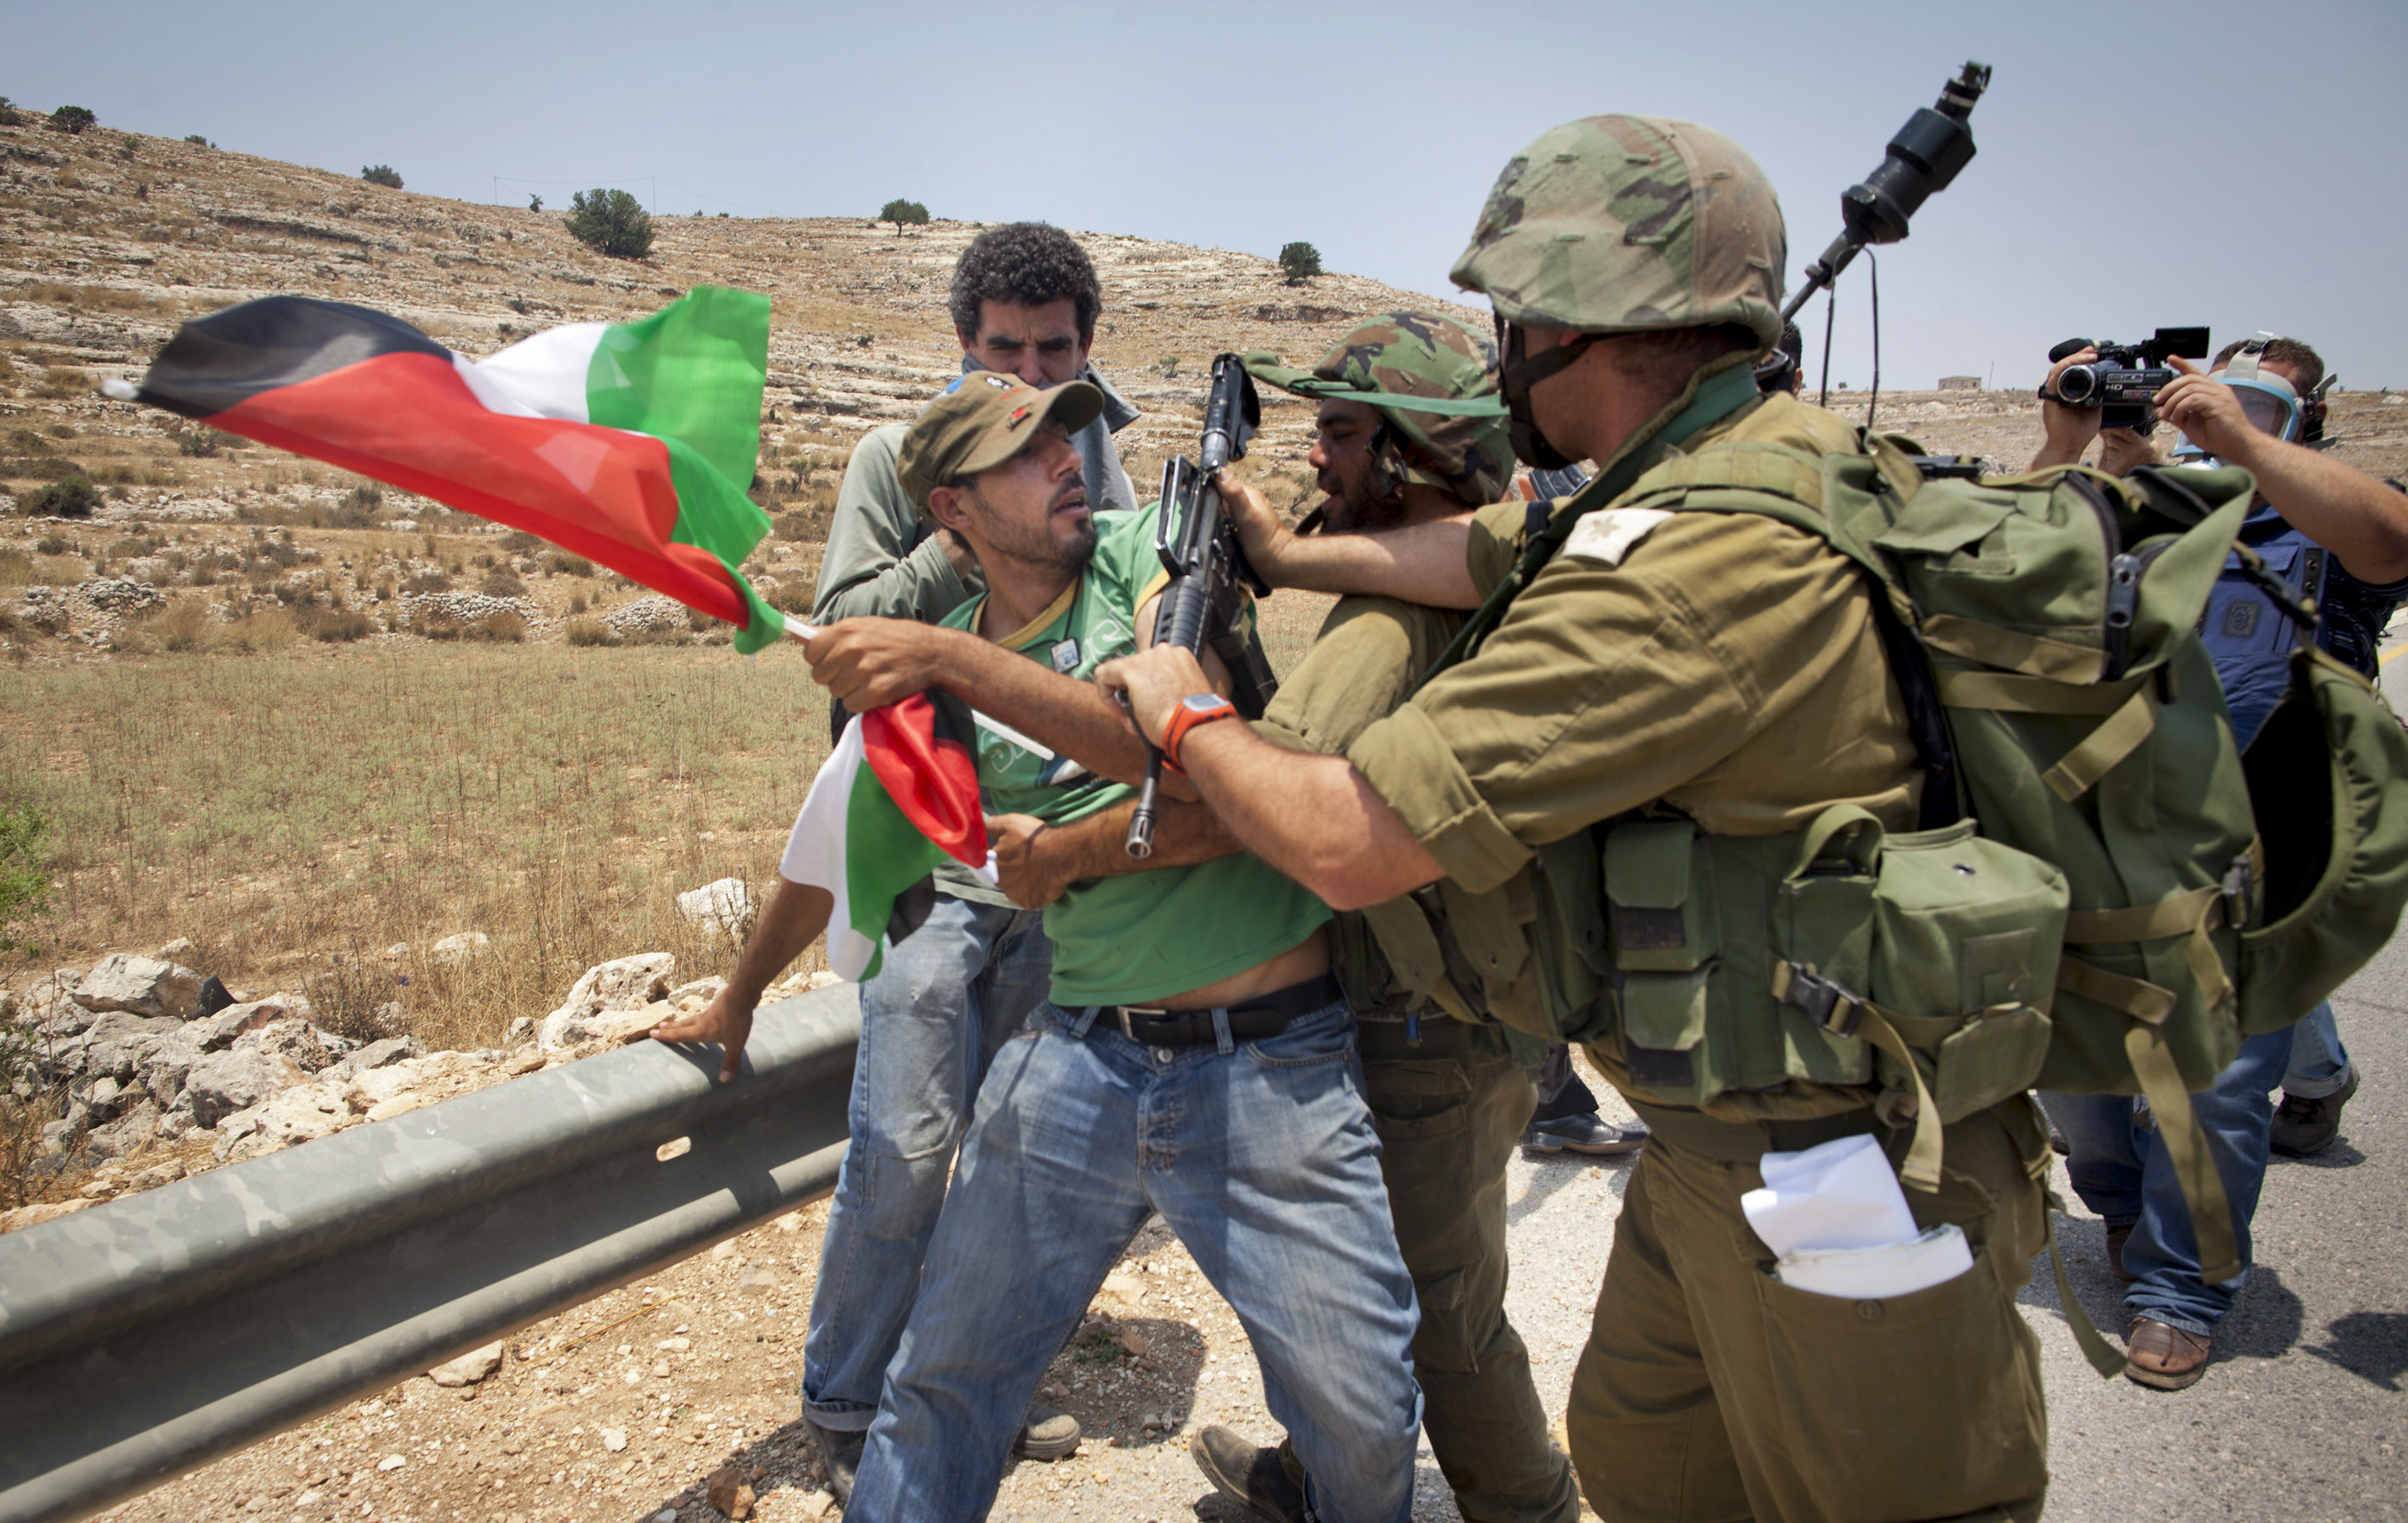 An unidentified protester holding a Palestinian flag scuffles with Israeli security forces during a joint pro-Palestinian demonstration held by foreign, Israeli and Palestinian demonstrators in the West Bank village of Nabi Saleh, Saturday, July 9, 2011. Some of the international pro-Palestinian activists questioned at Israel's airport over the weekend have reached the West Bank and participated in anti-Israel protests Saturday. (AP Photo/Oren Ziv)